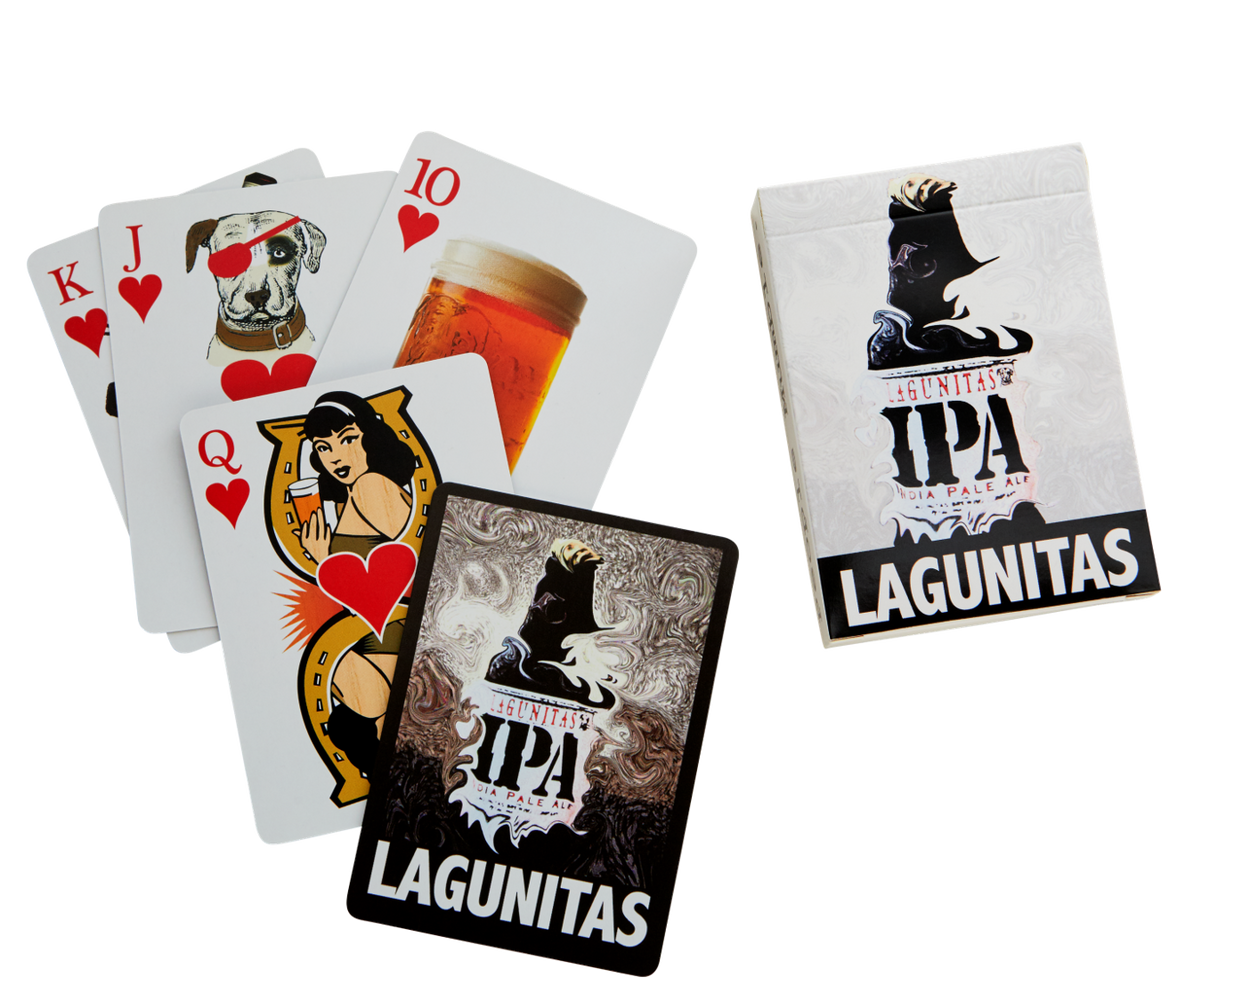 A fully-customized deck of Lagunitas beer playing cards featuring proportionally-sipped mason jars for all the Number Cards, and special art for each Face Card. Whatever you’re playin’, it’s good to have friends!